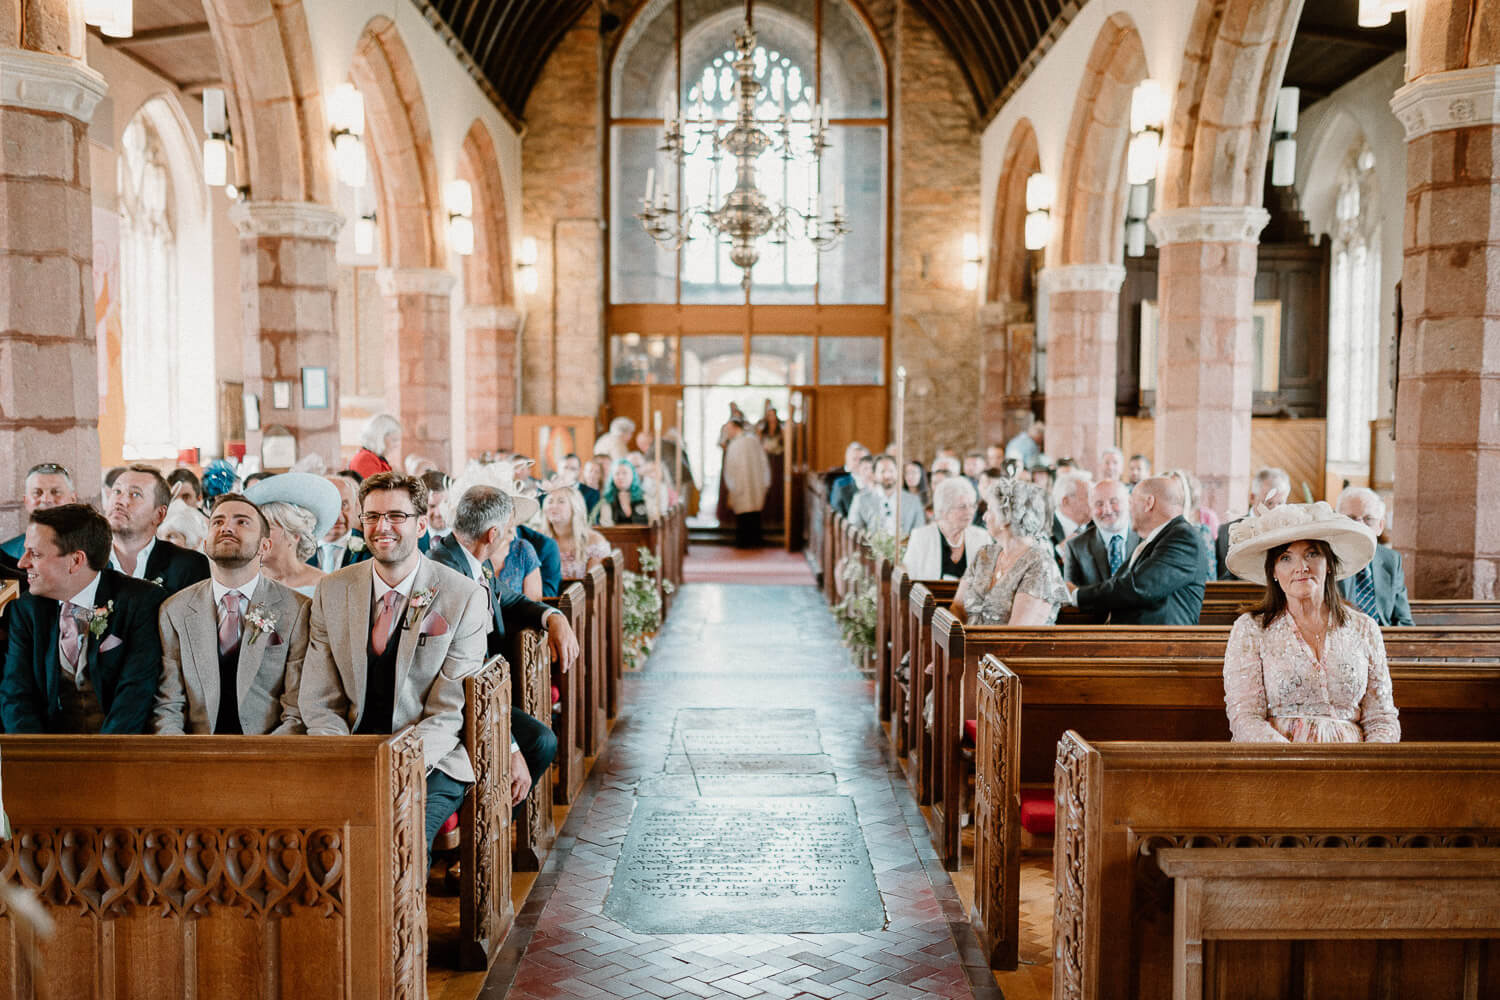 Groom and guests await the brides arrival at St Andrew's Church in Ipplepen, Devon.